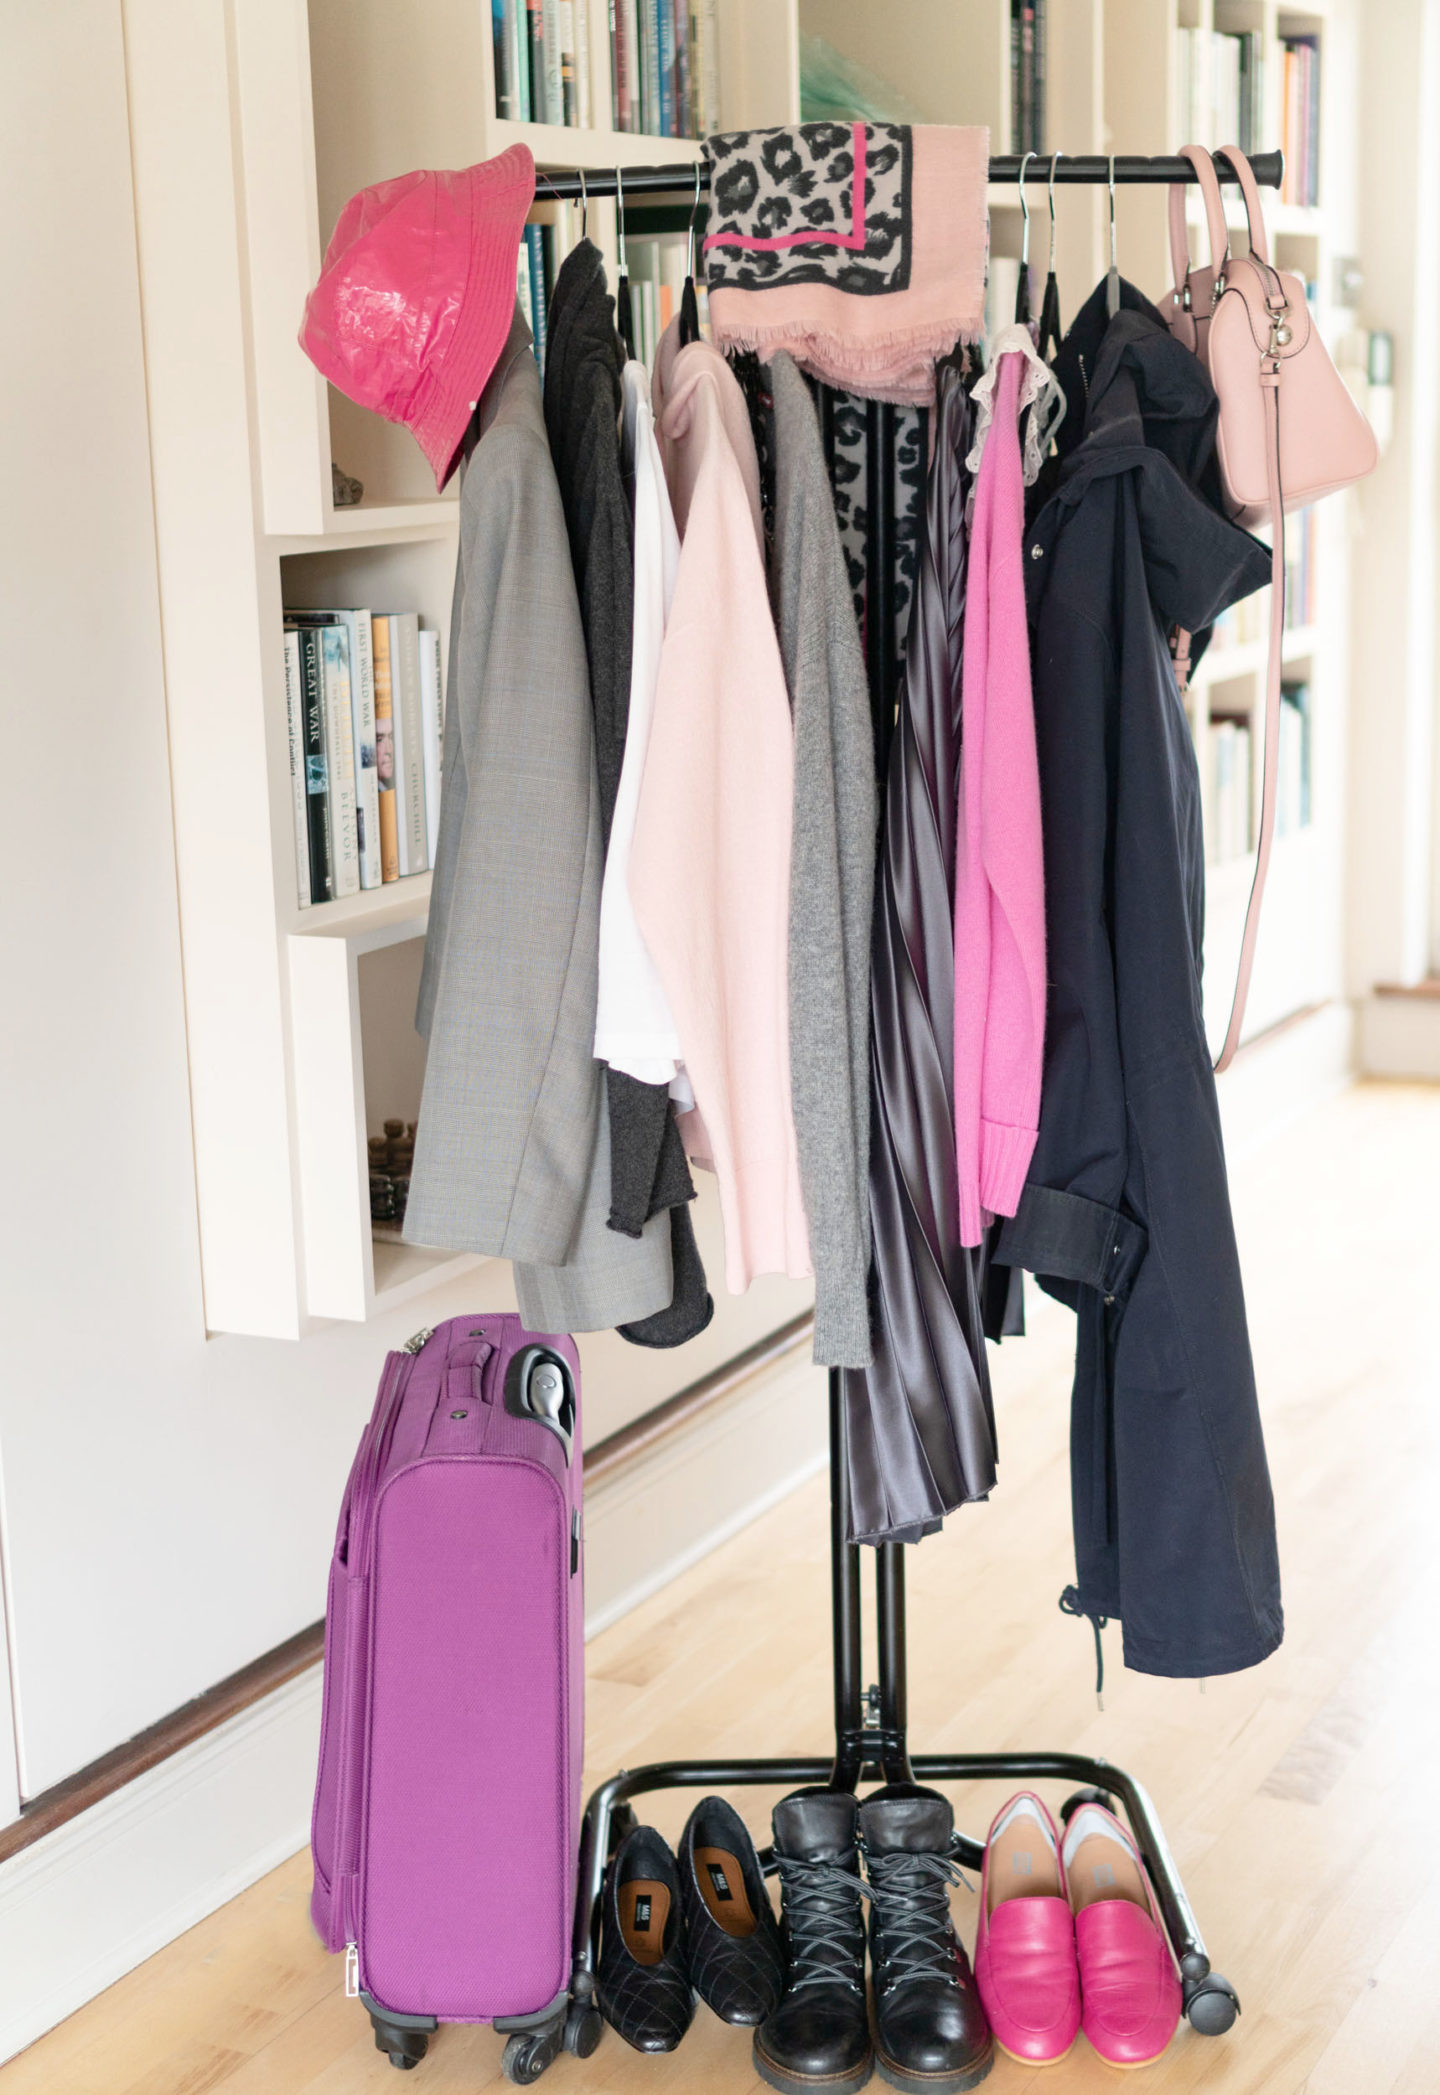 How to create a weekend capsule wardrobe for June